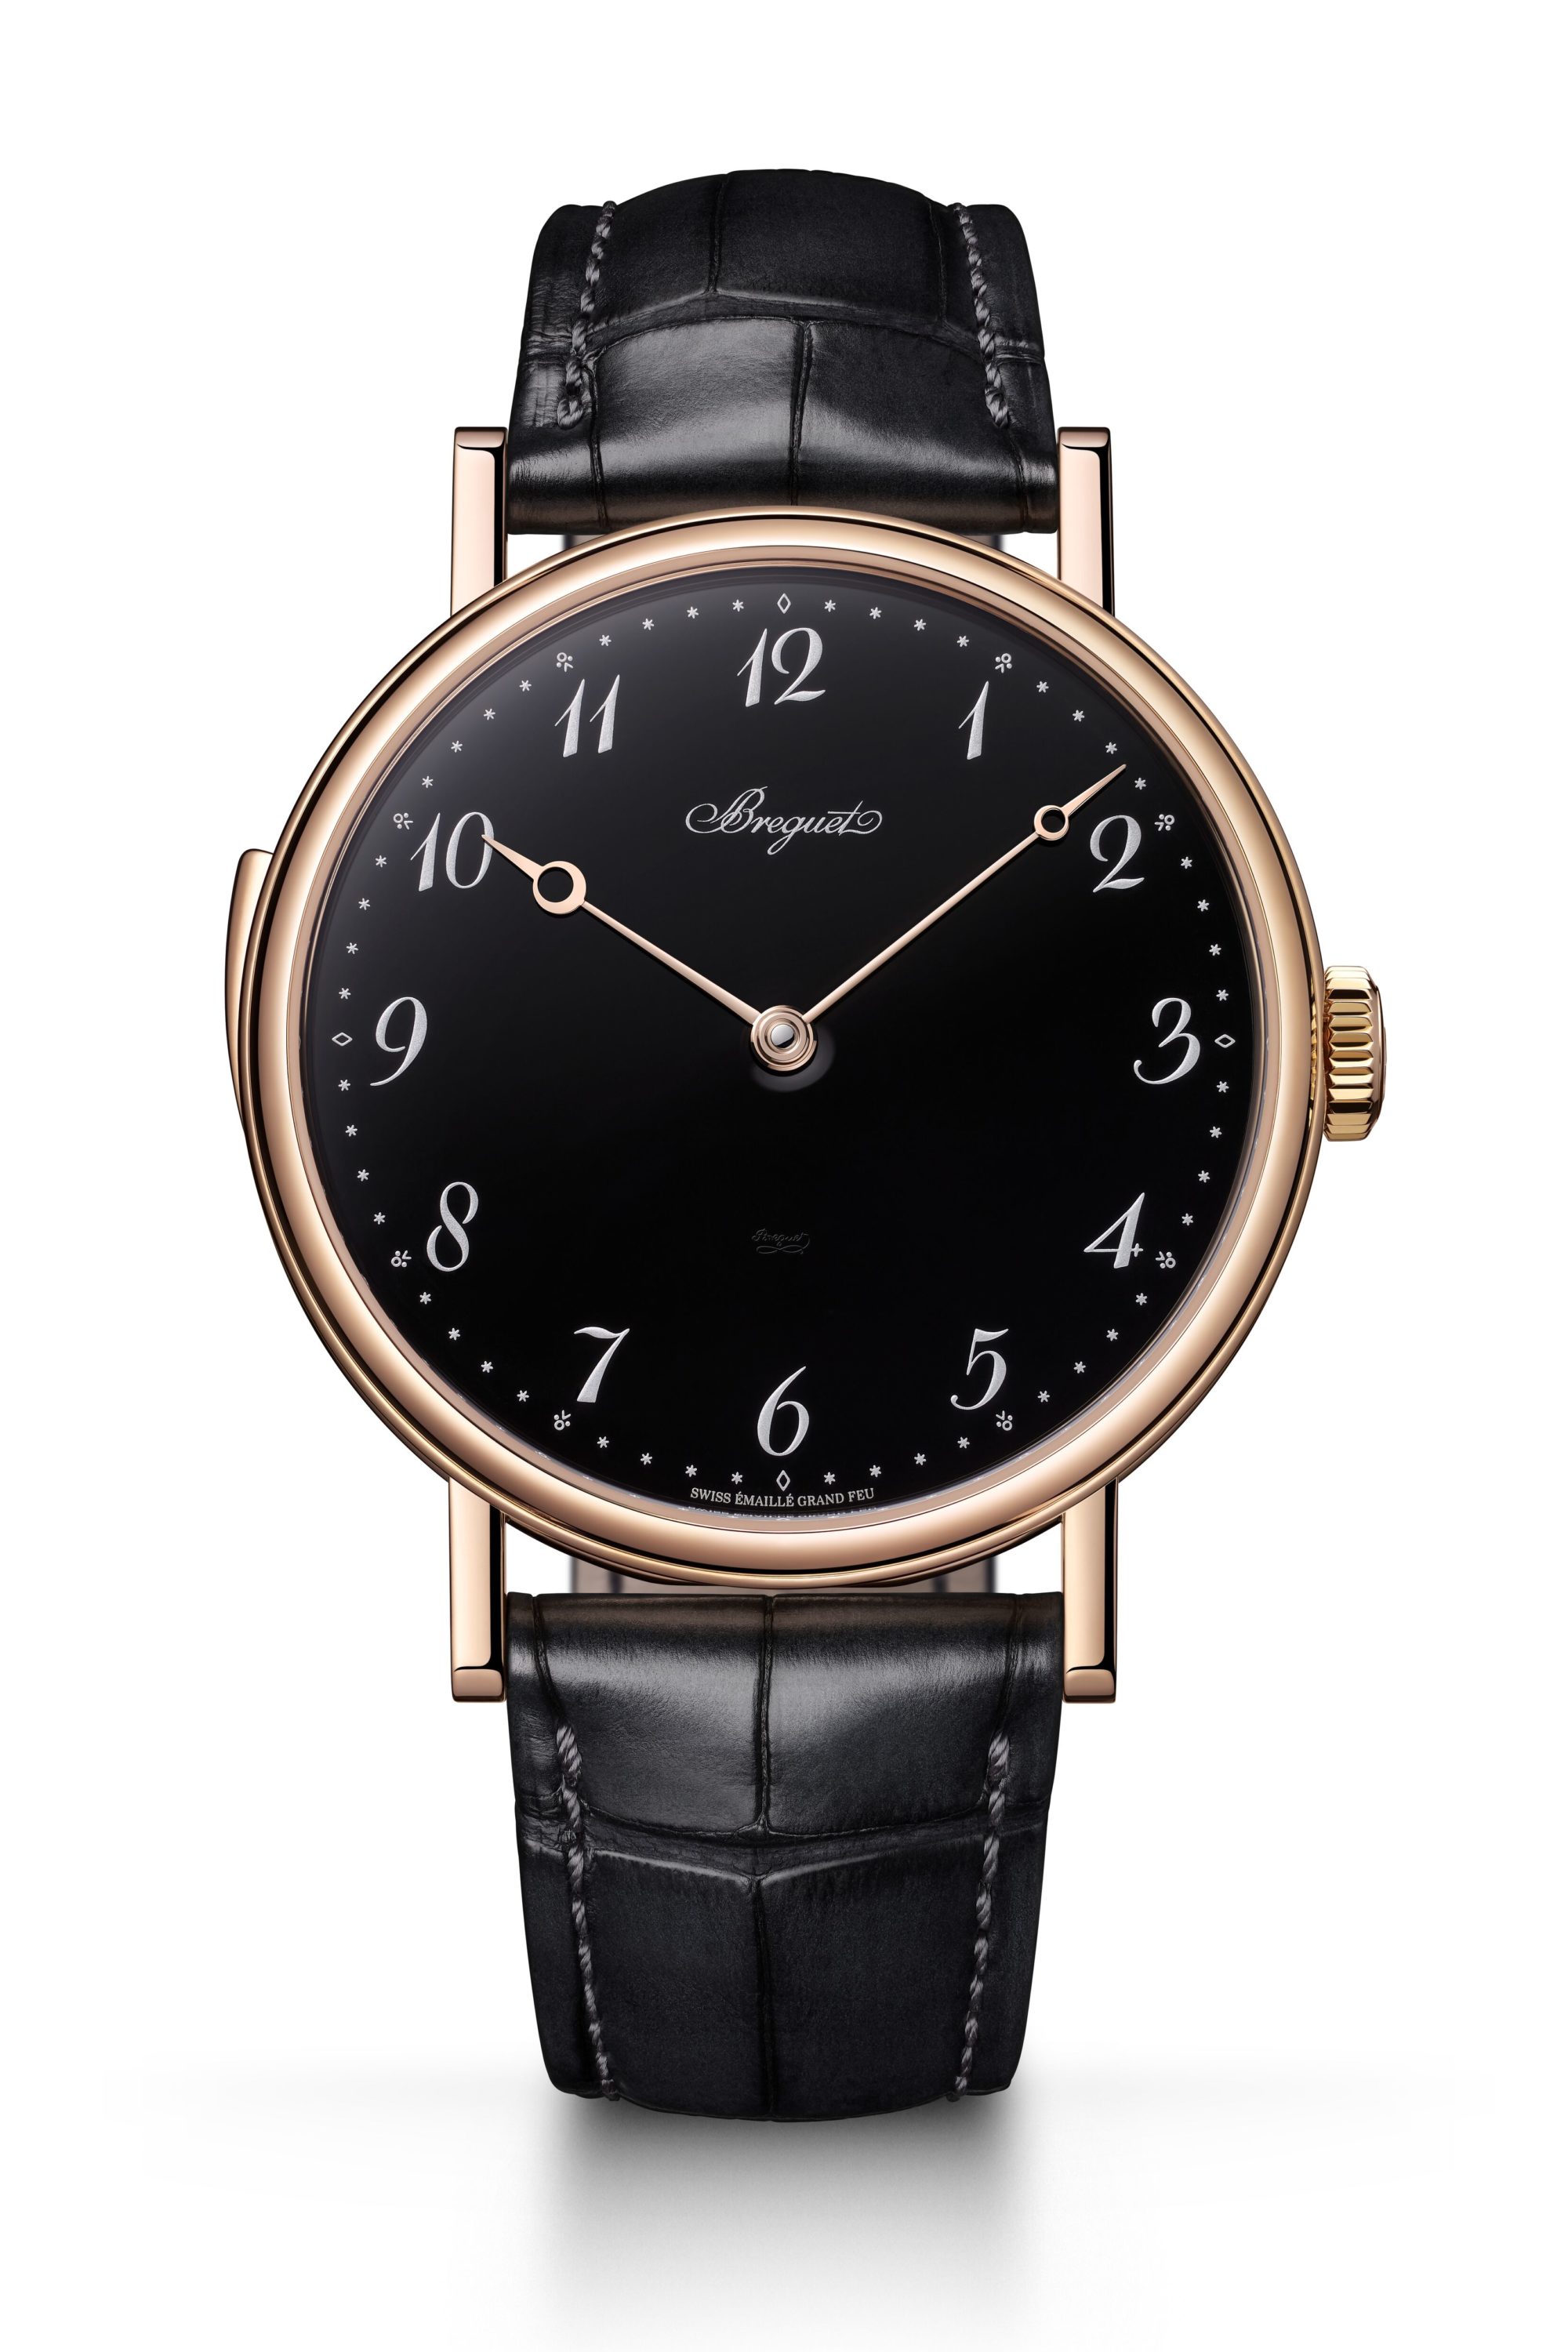 Music to Collectors’ Ears: Introducing the Breguet Classique Répétition Minutes 7673 in Rose Gold